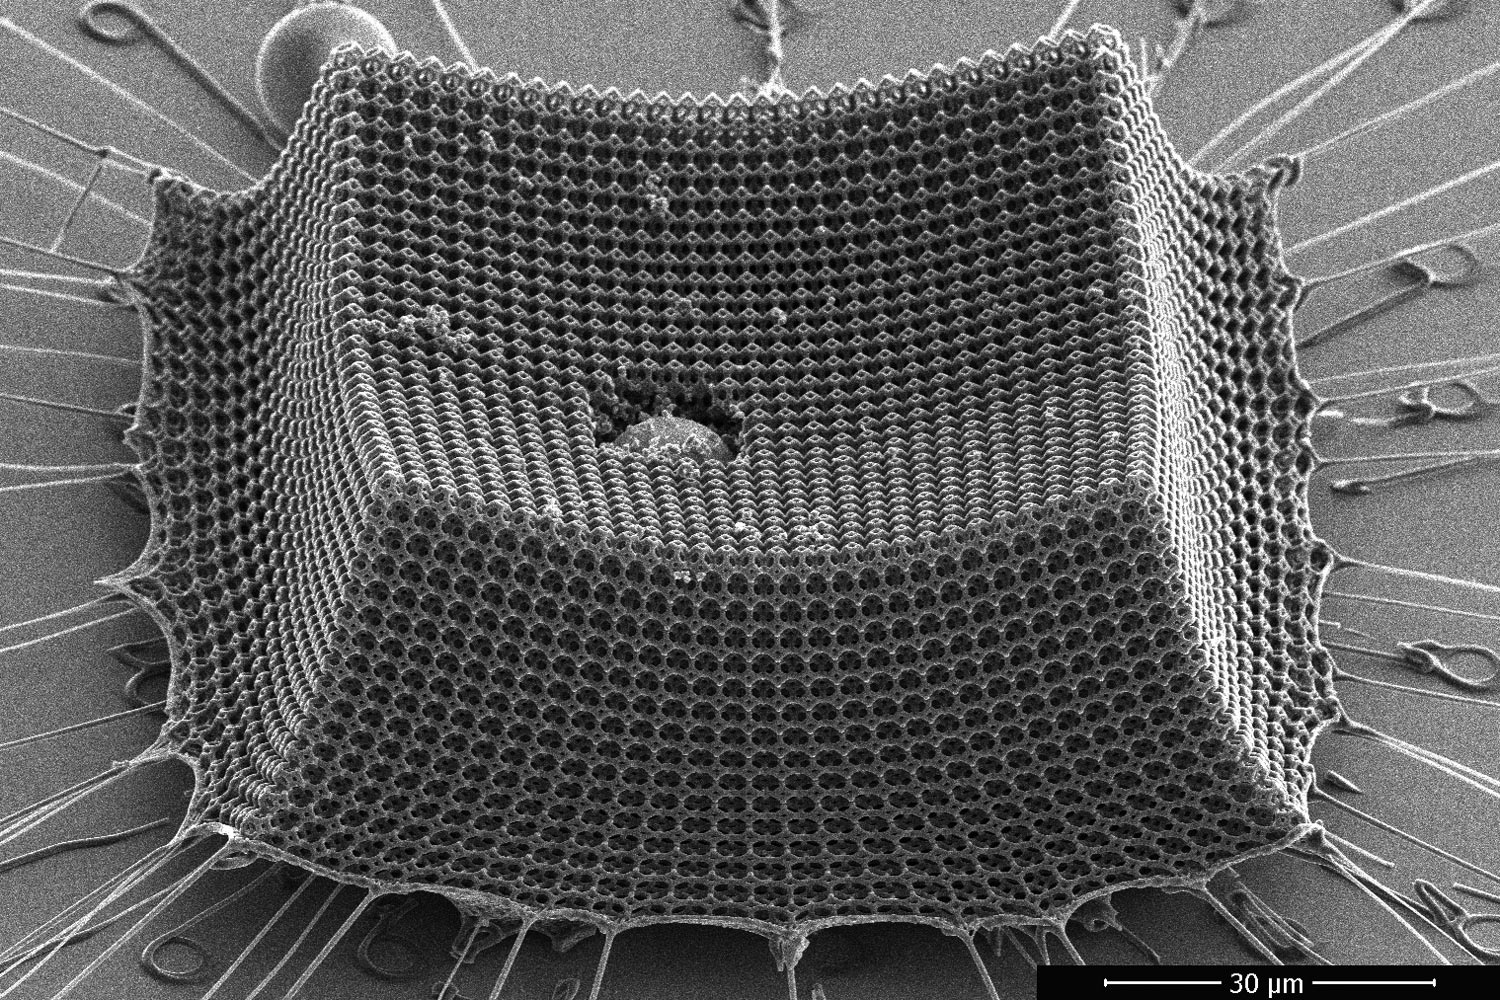 Tougher Than Kevlar and Steel: Ultralight Material Withstands